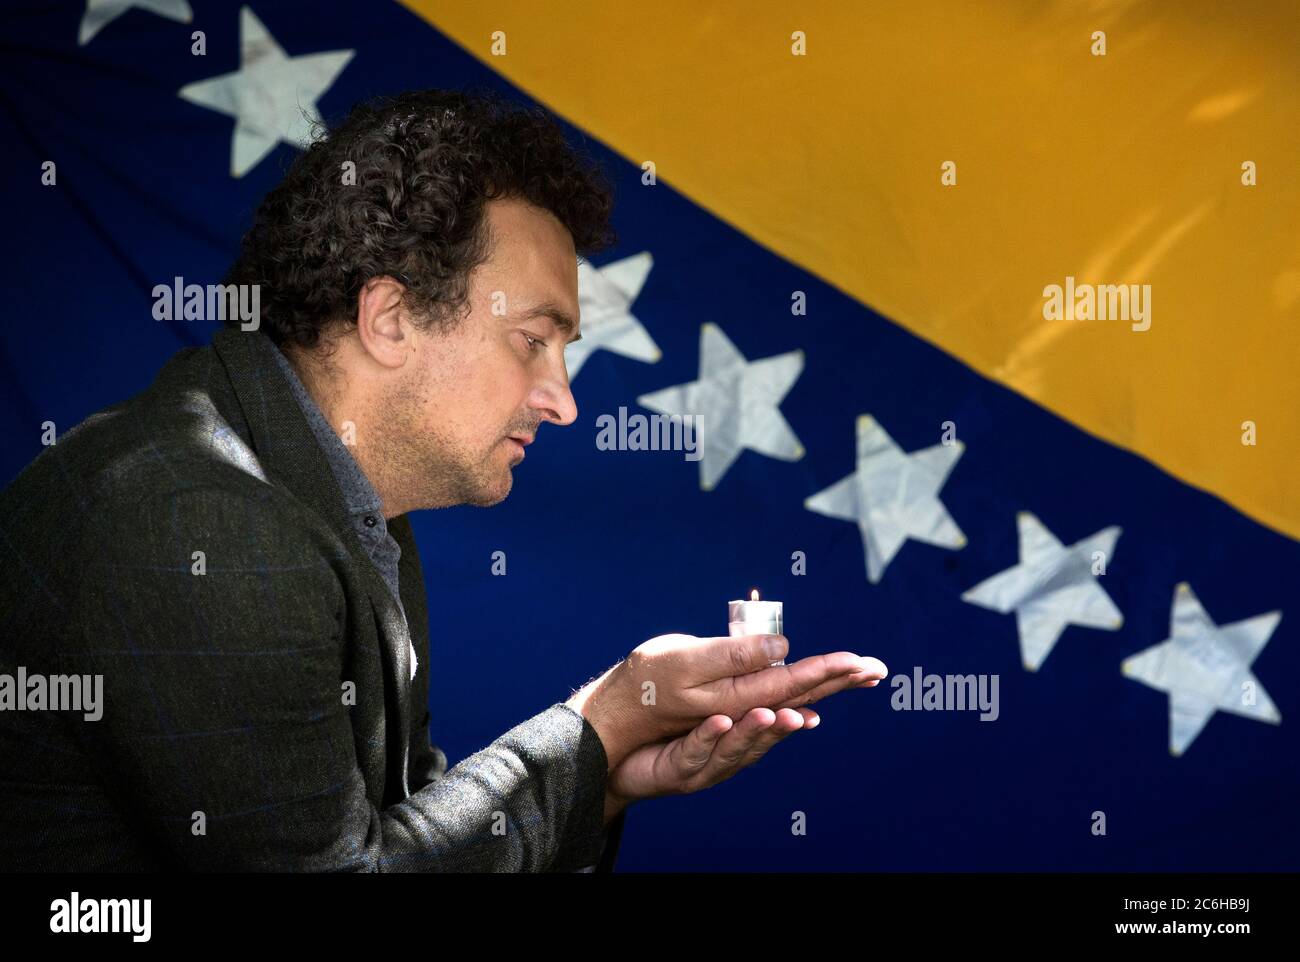 BAFTA award-winning film director Samir Mehanovic, who came to the UK as an immigrant from the Bosnian war in 1995 and now lives in Edinburgh, lights a candle to commemorate the 25th anniversary of the Srebrenica genocide. Stock Photo